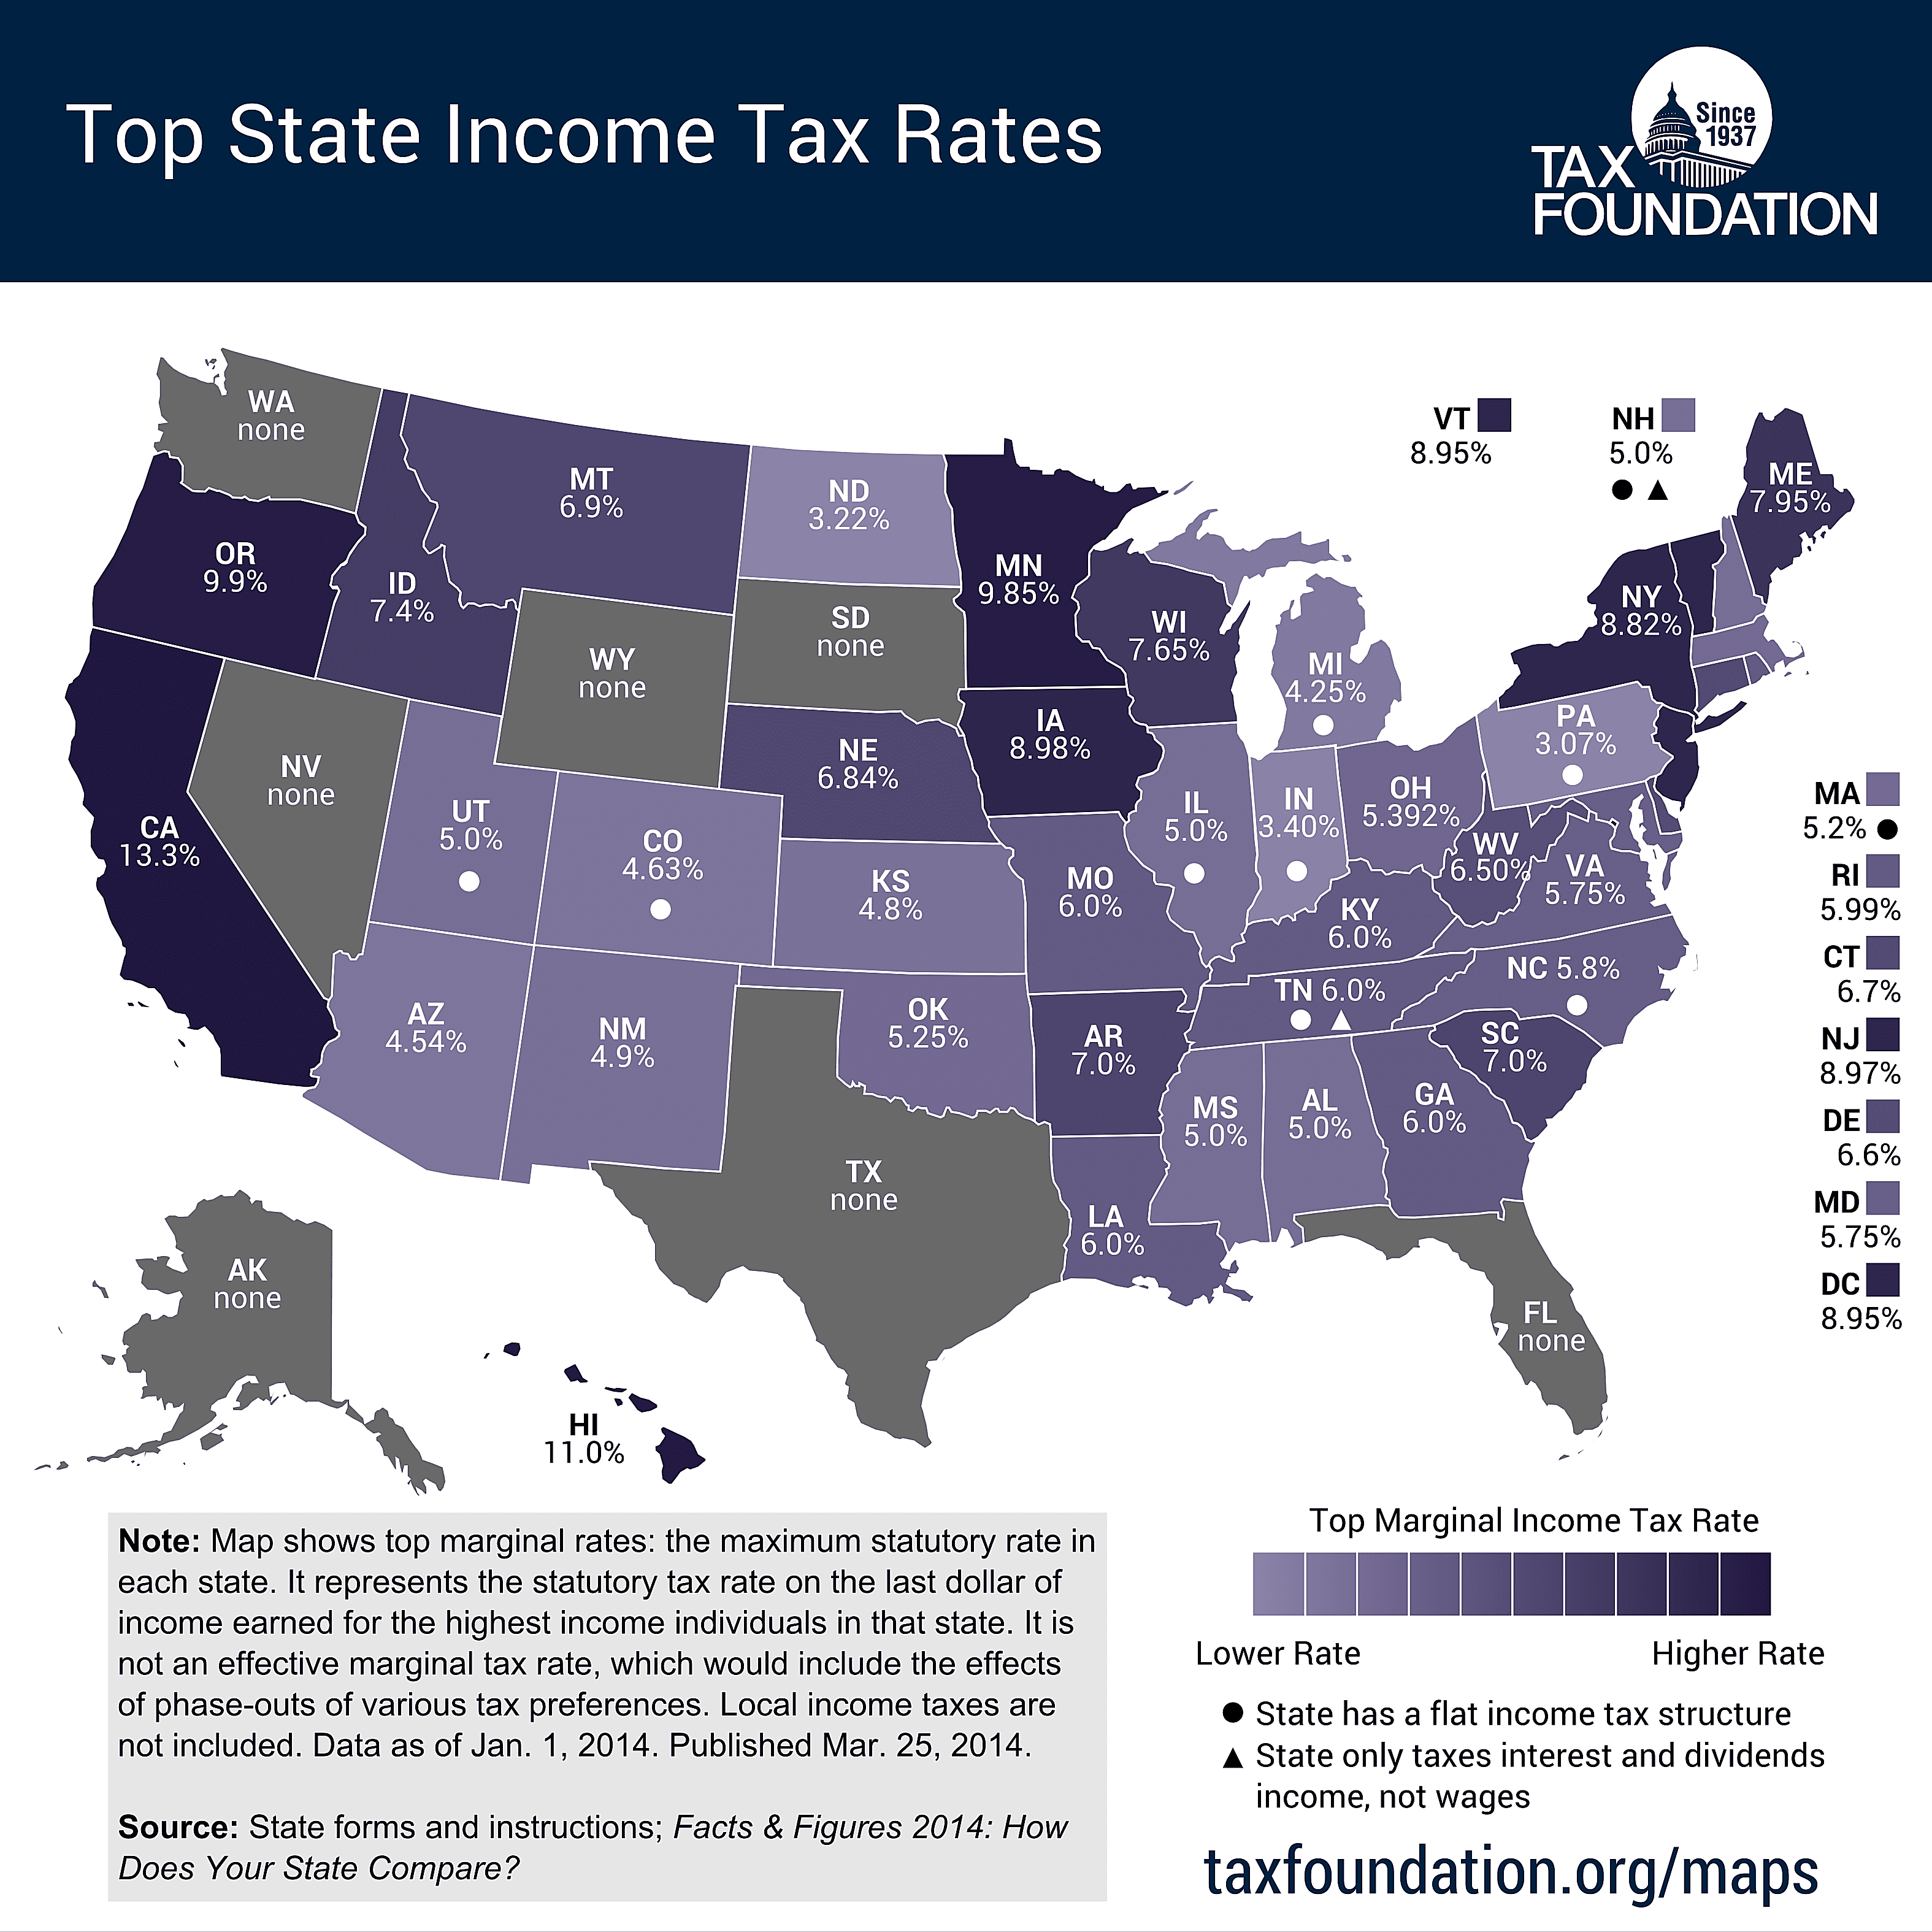 A List of Tax Rates for Each State